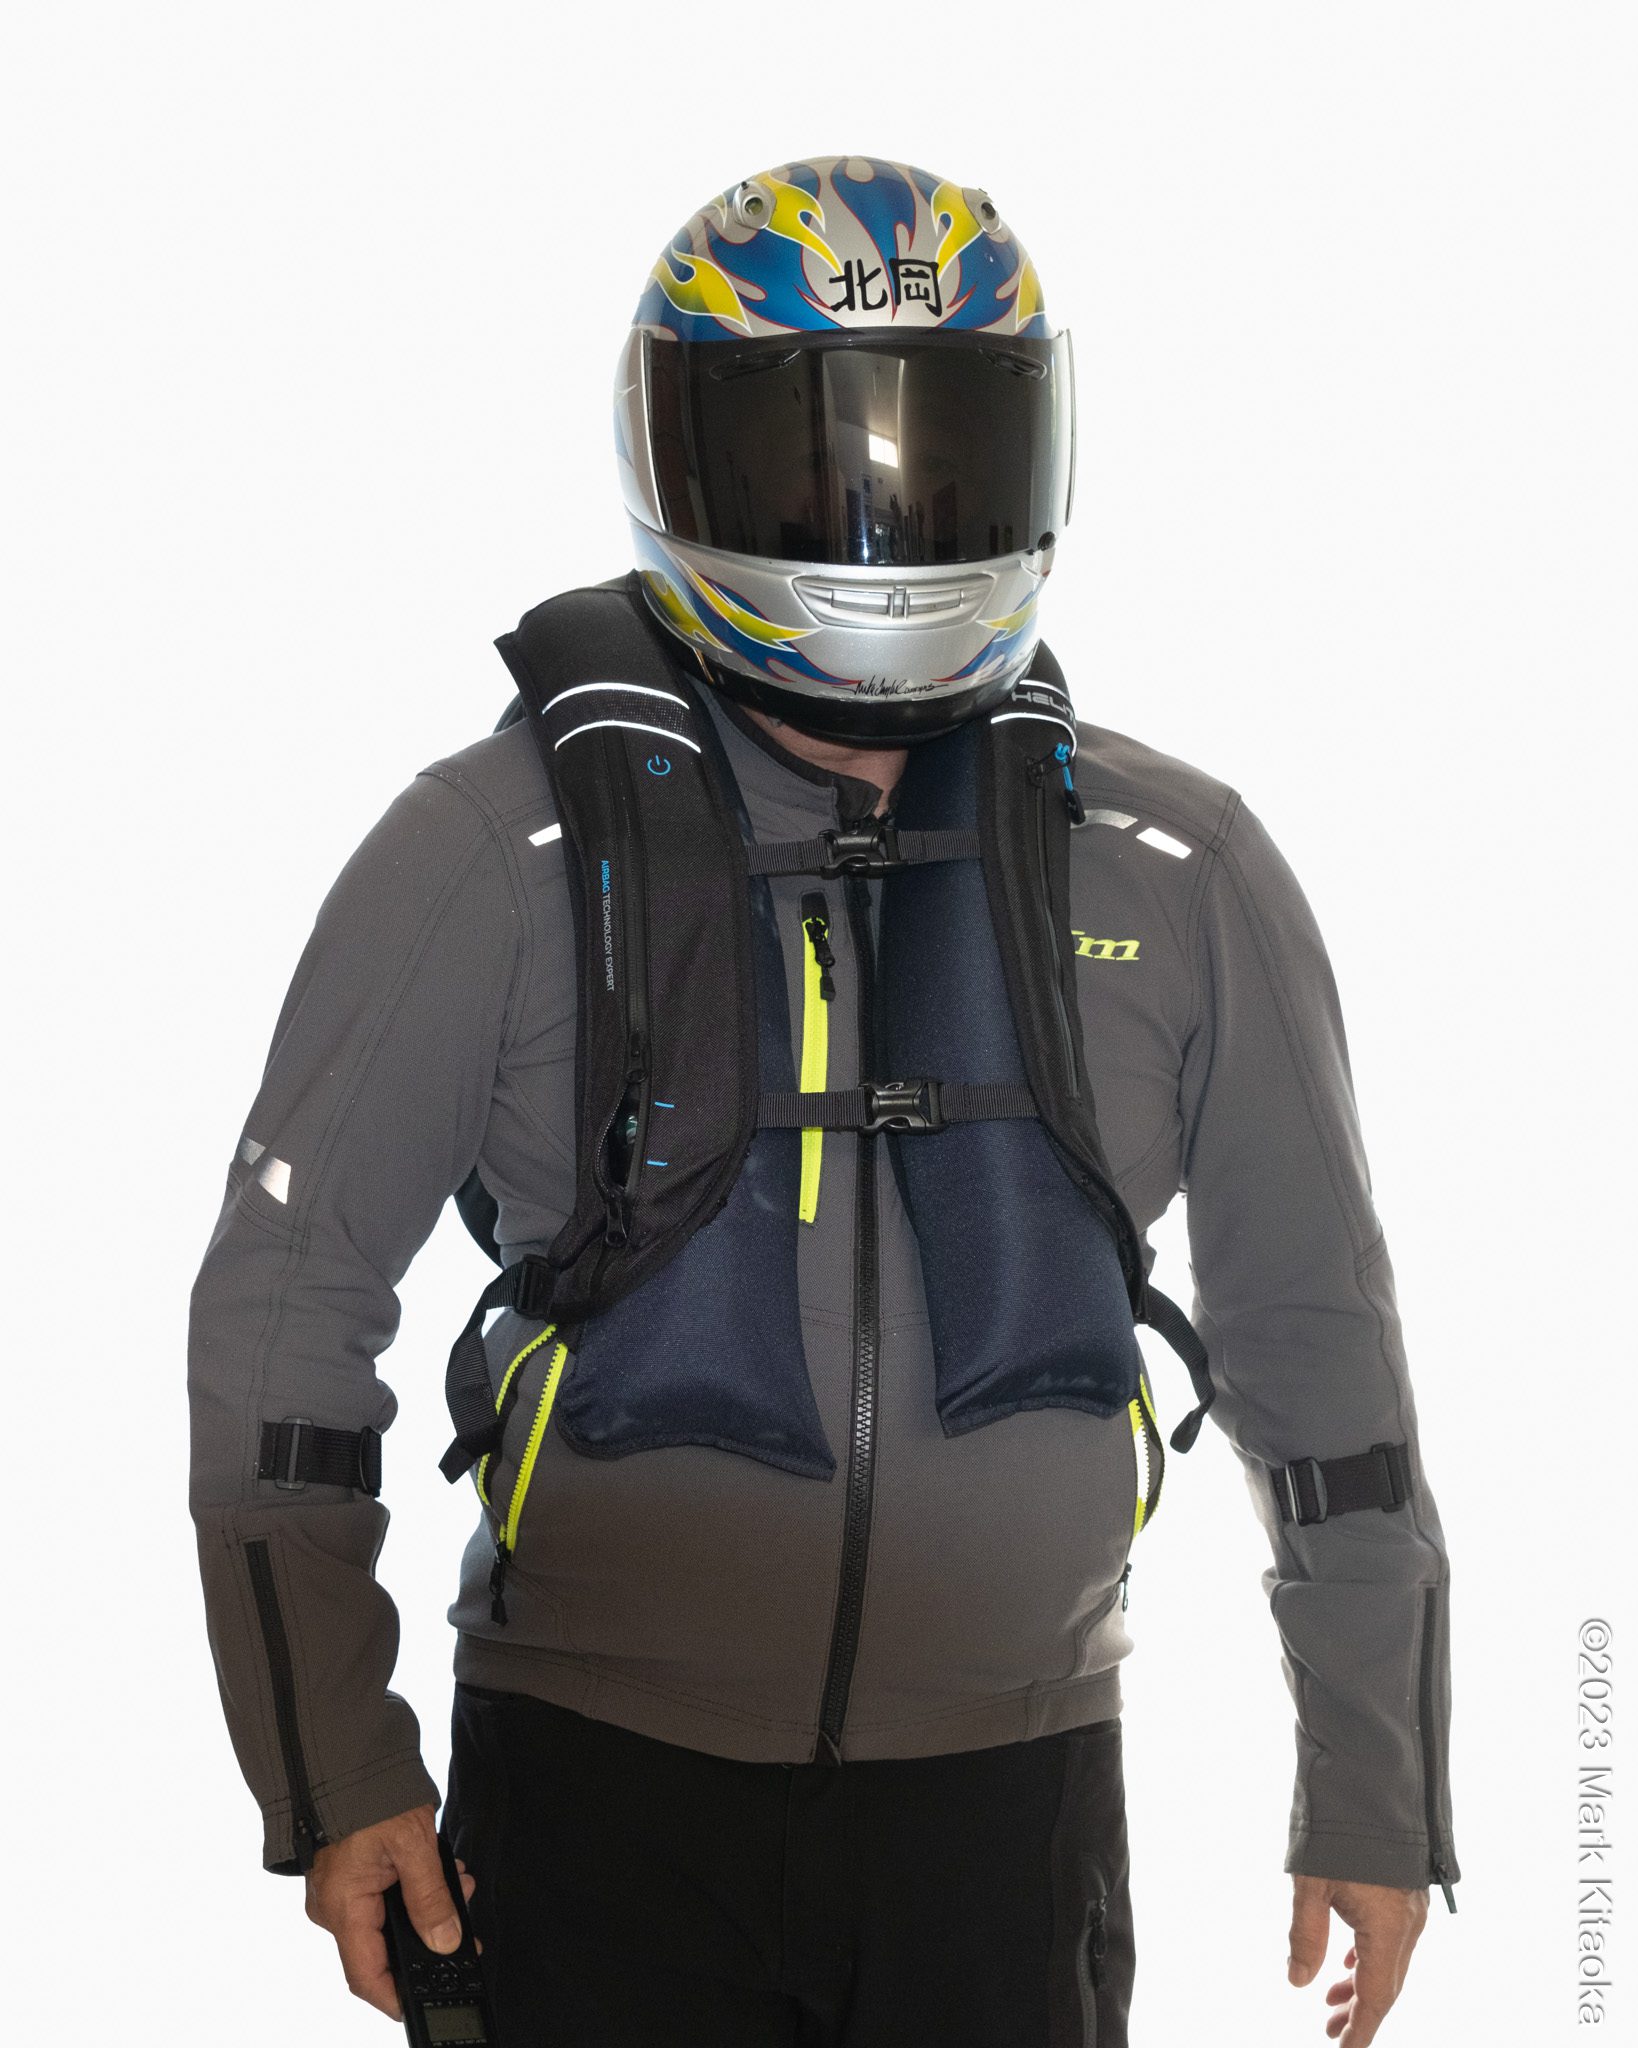 Front view wearing the H-MOOV airbag backpack